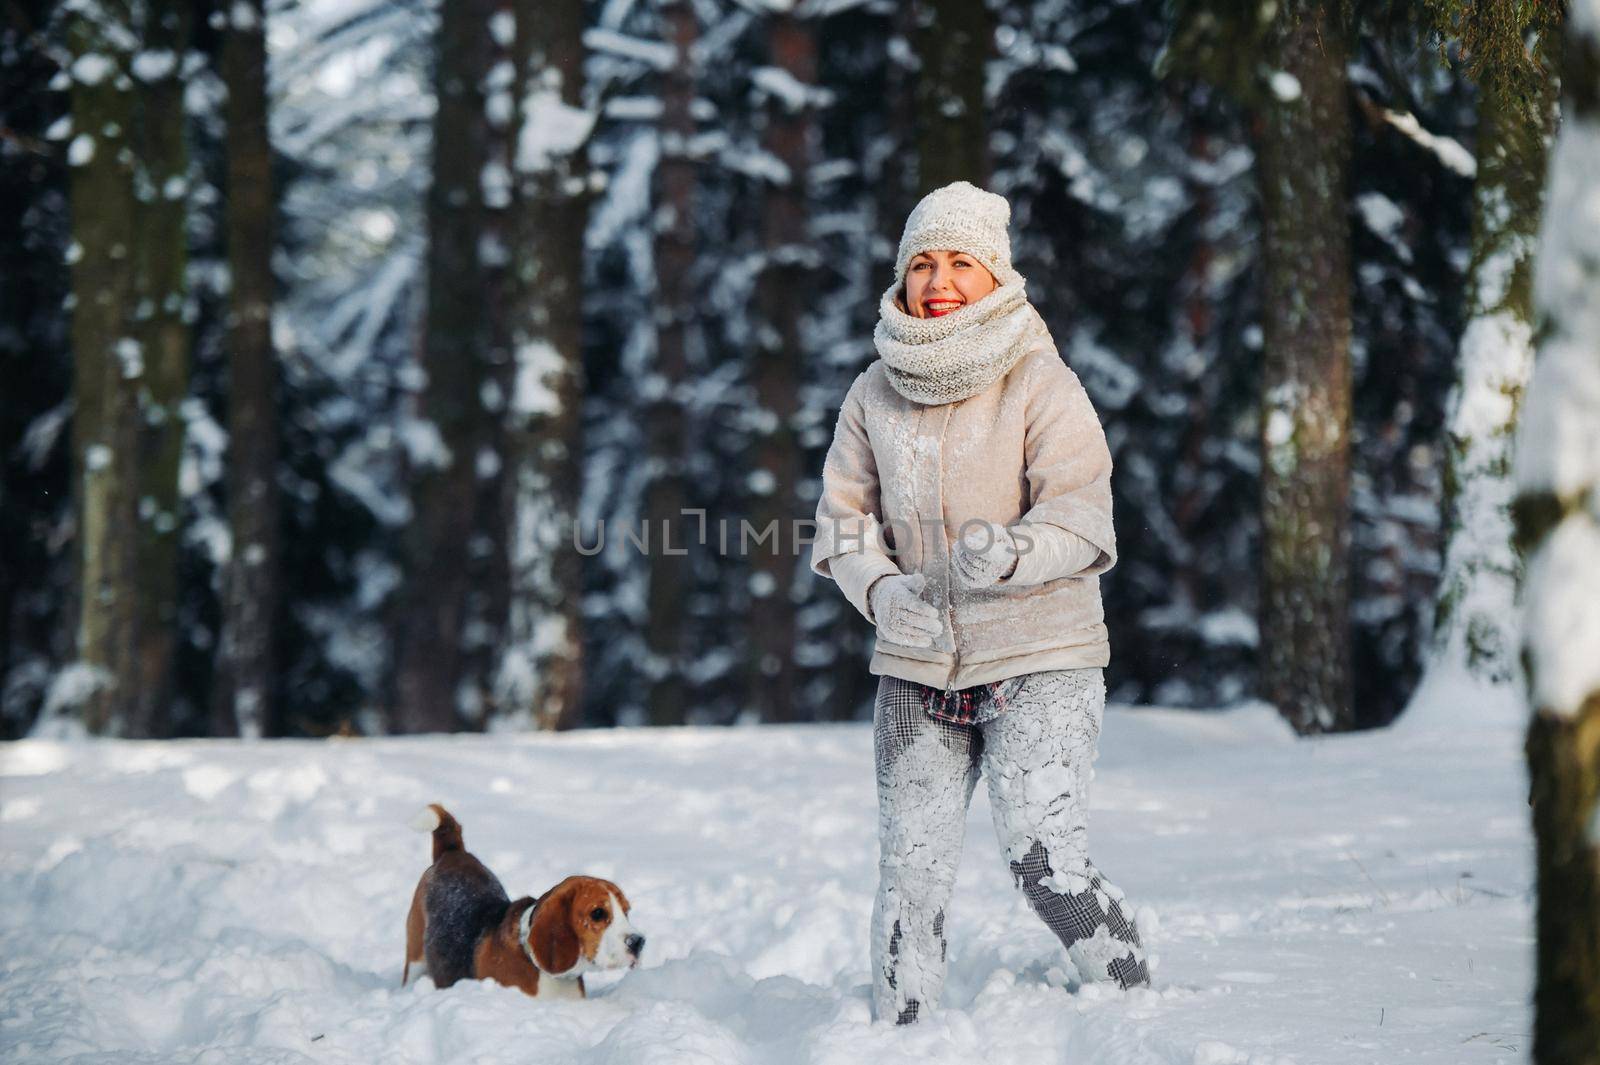 a woman on a walk with her dog in the winter forest. mistress and dog game in the snowy forest.